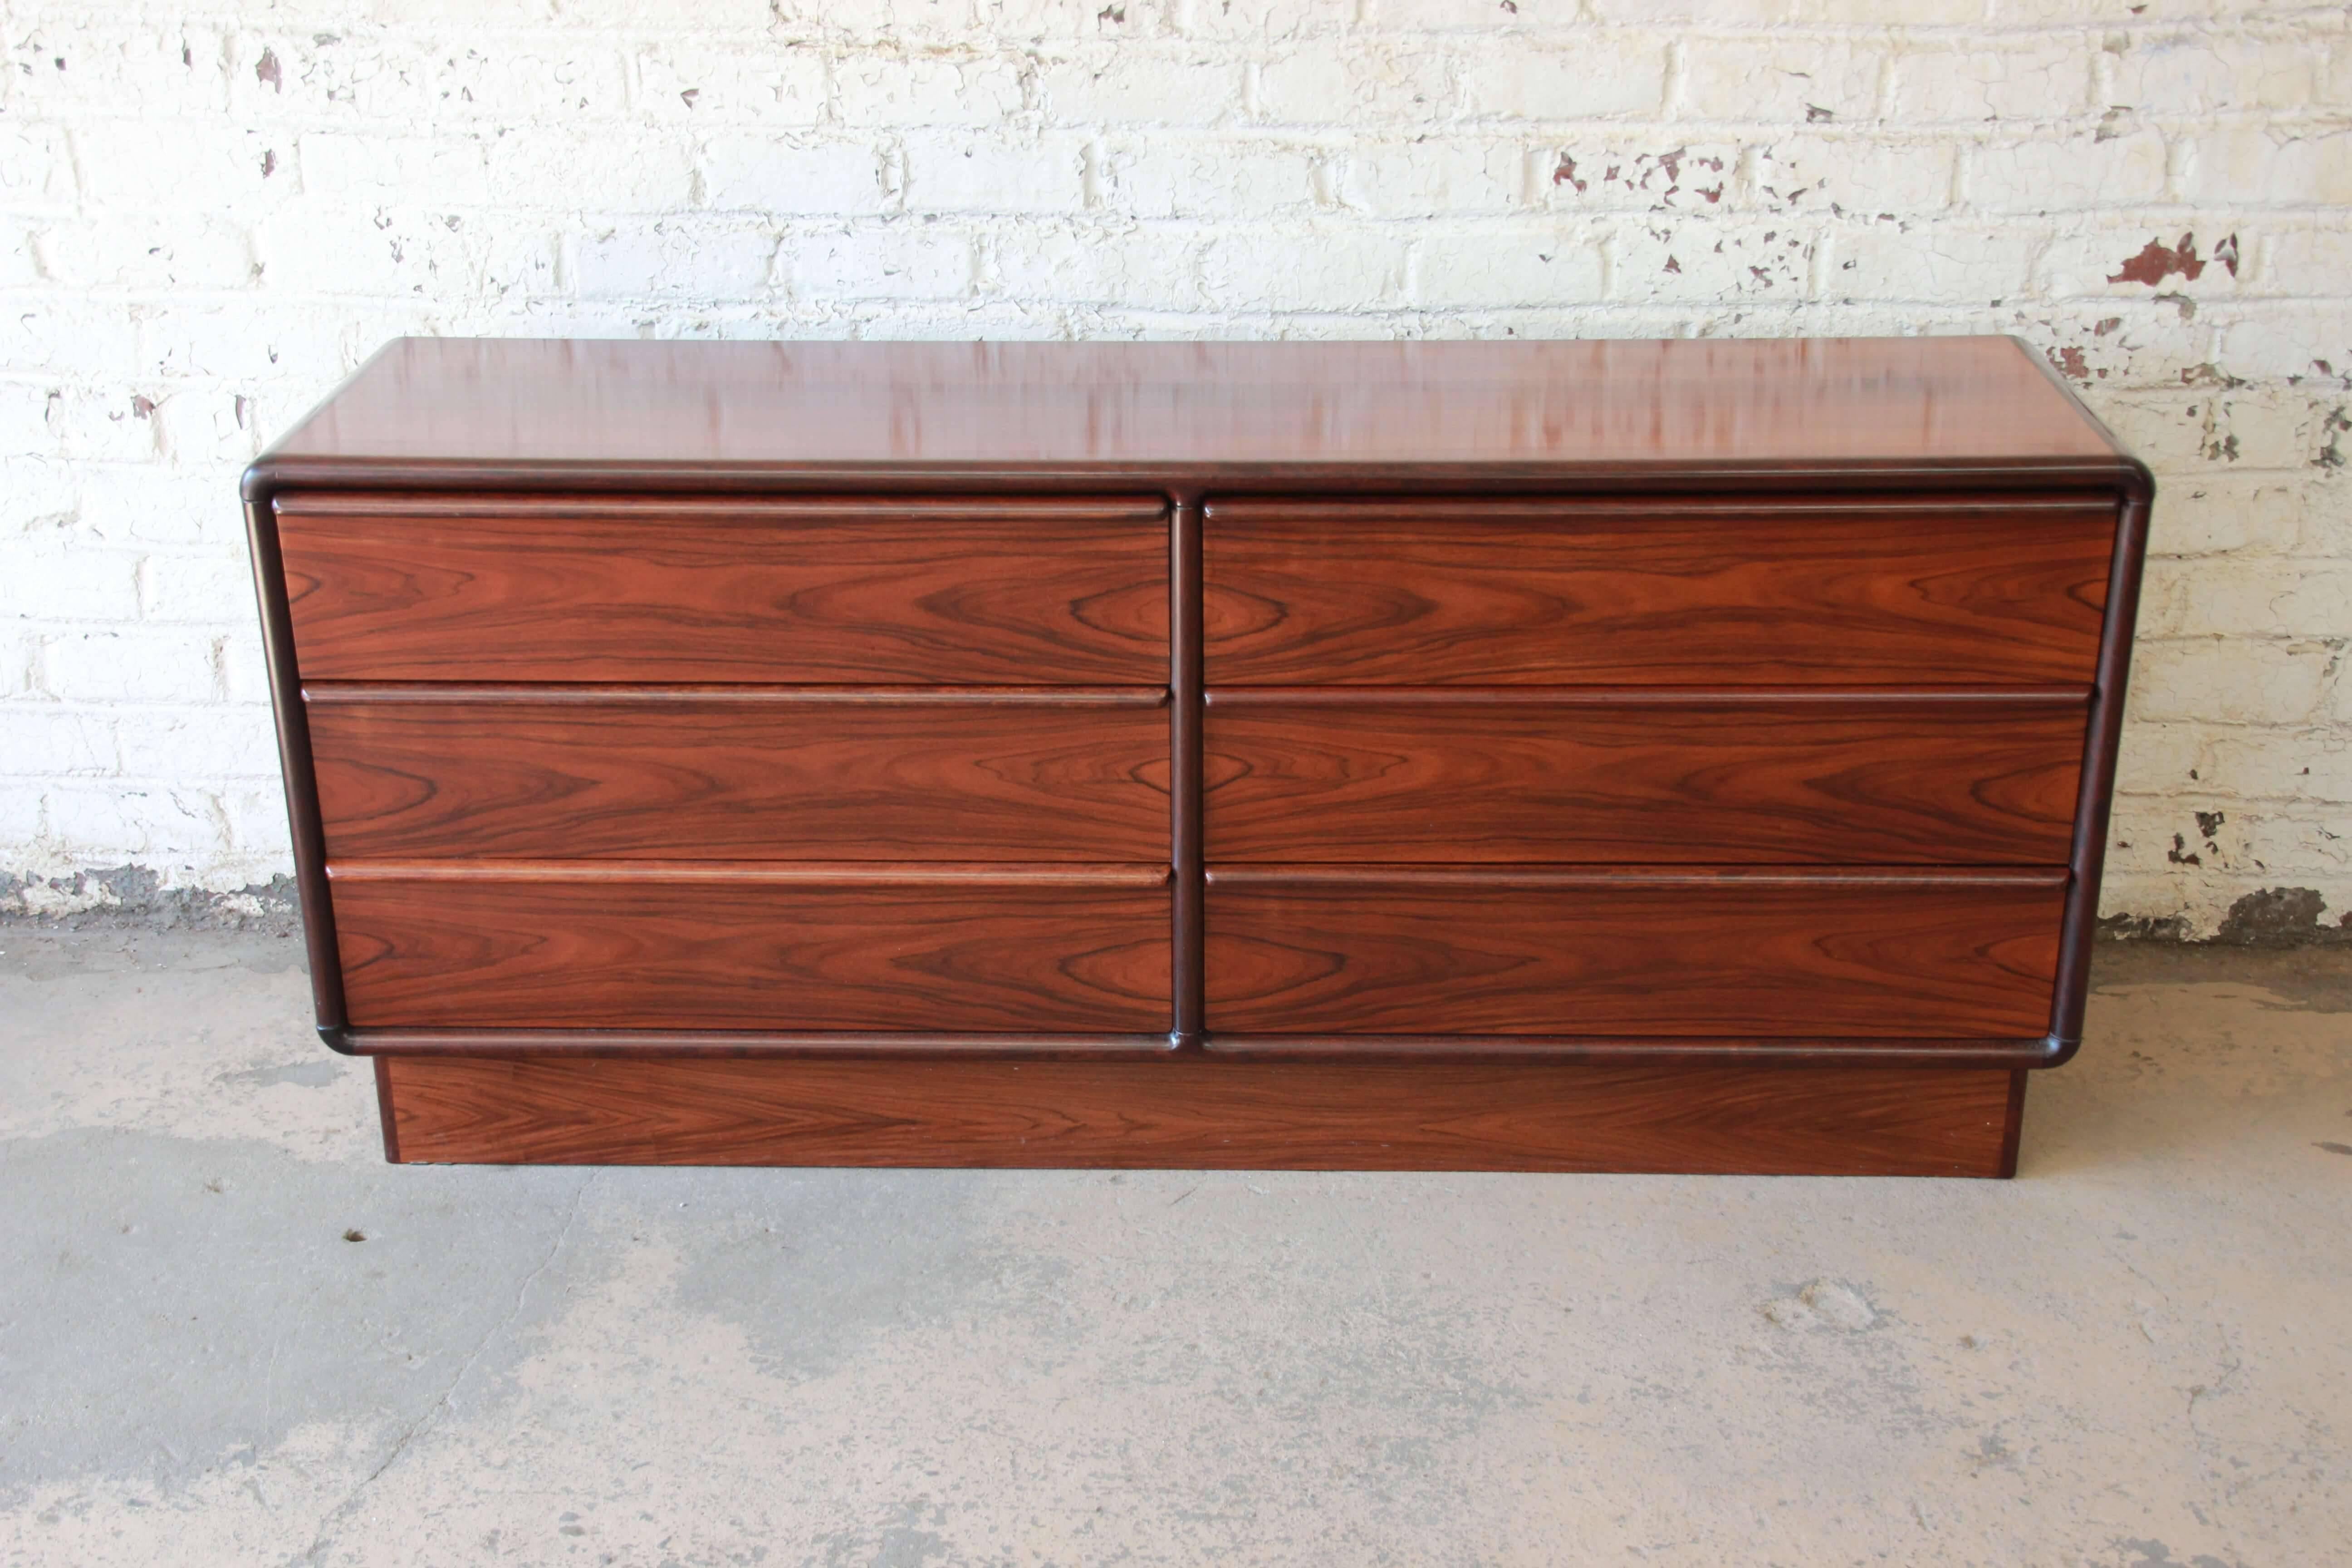 Offering a stunning Danish six-drawer rosewood dresser or credenza by Brouer. This piece has a beautiful wood grain that makes it a statement piece in any modern or Scandinavian environment. Each of the six drawers open and close smoothly while